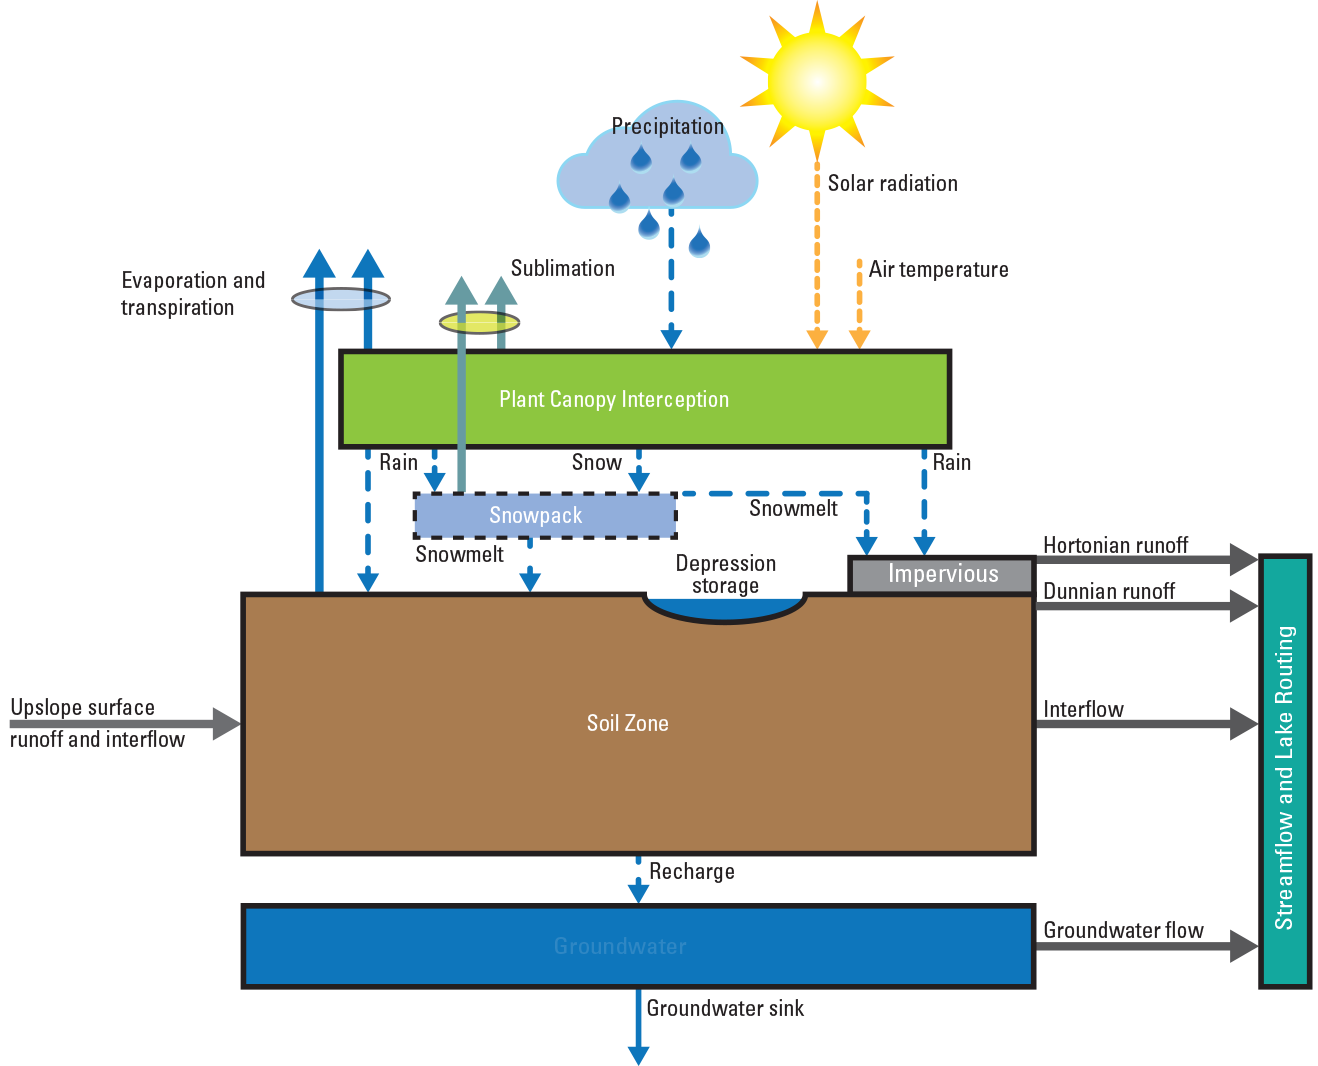 Flowchart shows movement of water to and from the atmosphere, surface, soil zone,
                        and groundwater zone